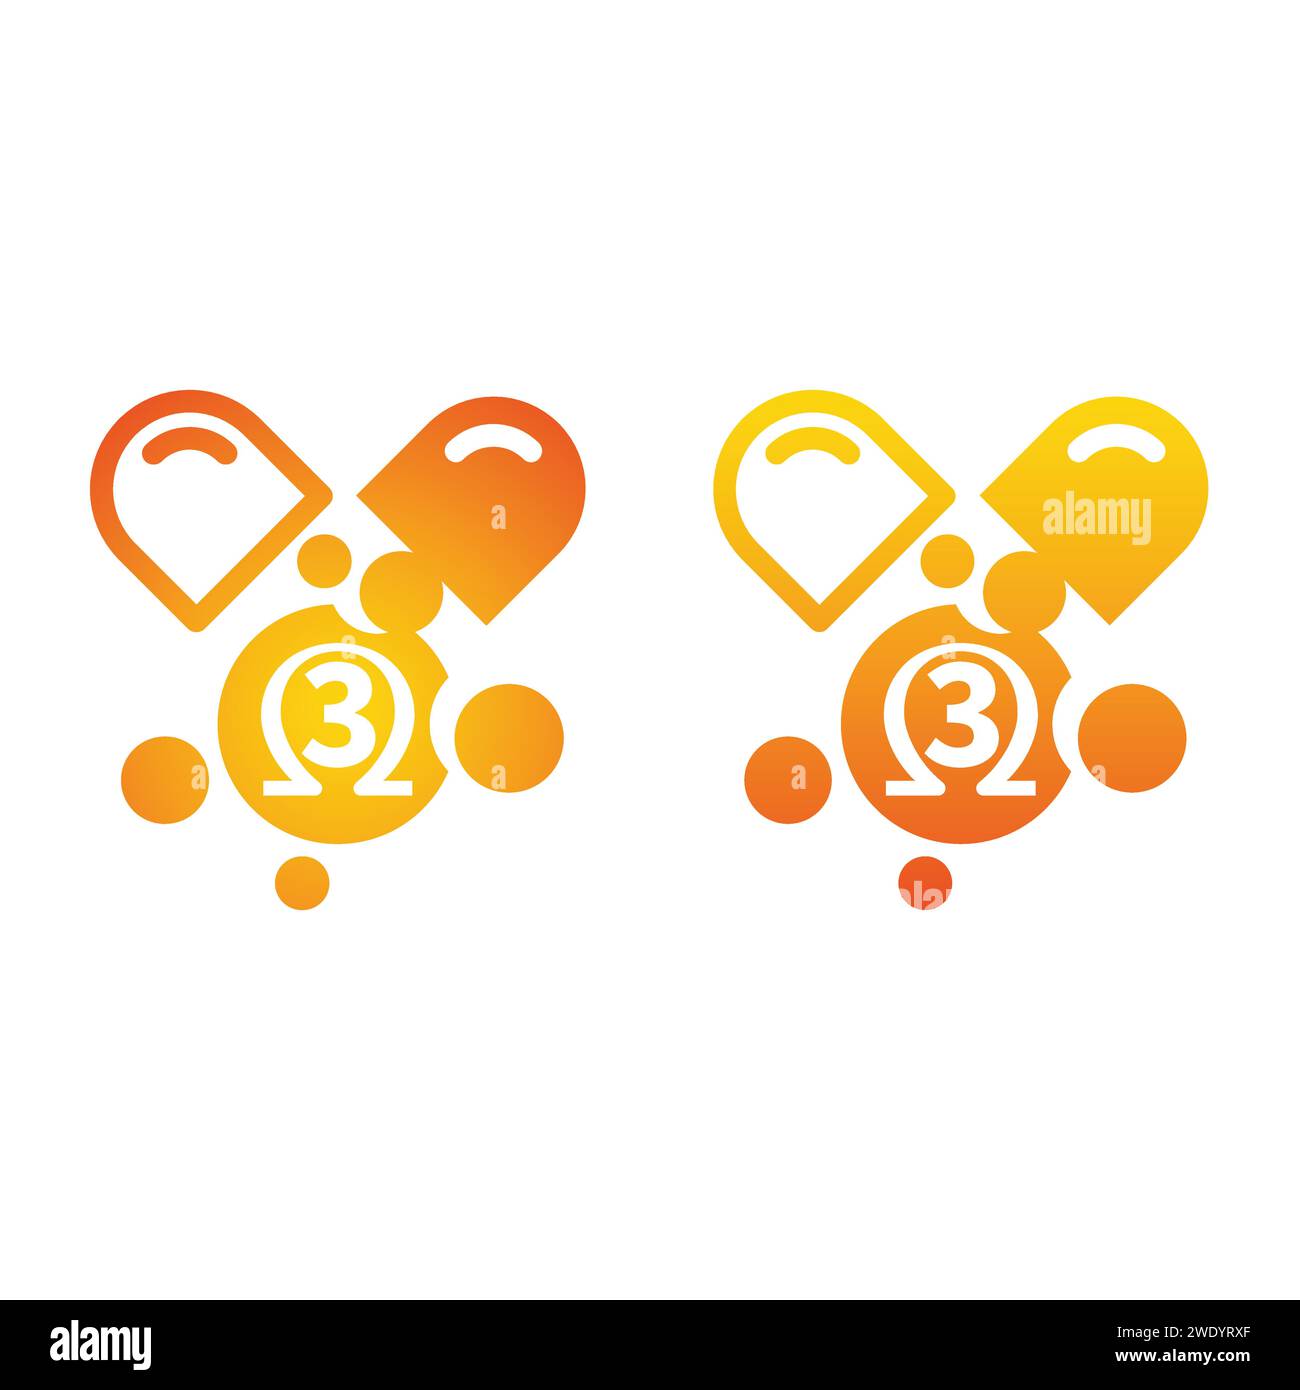 Omega 3 vector icon. Pill or capsule colorful drug. Stock Vector